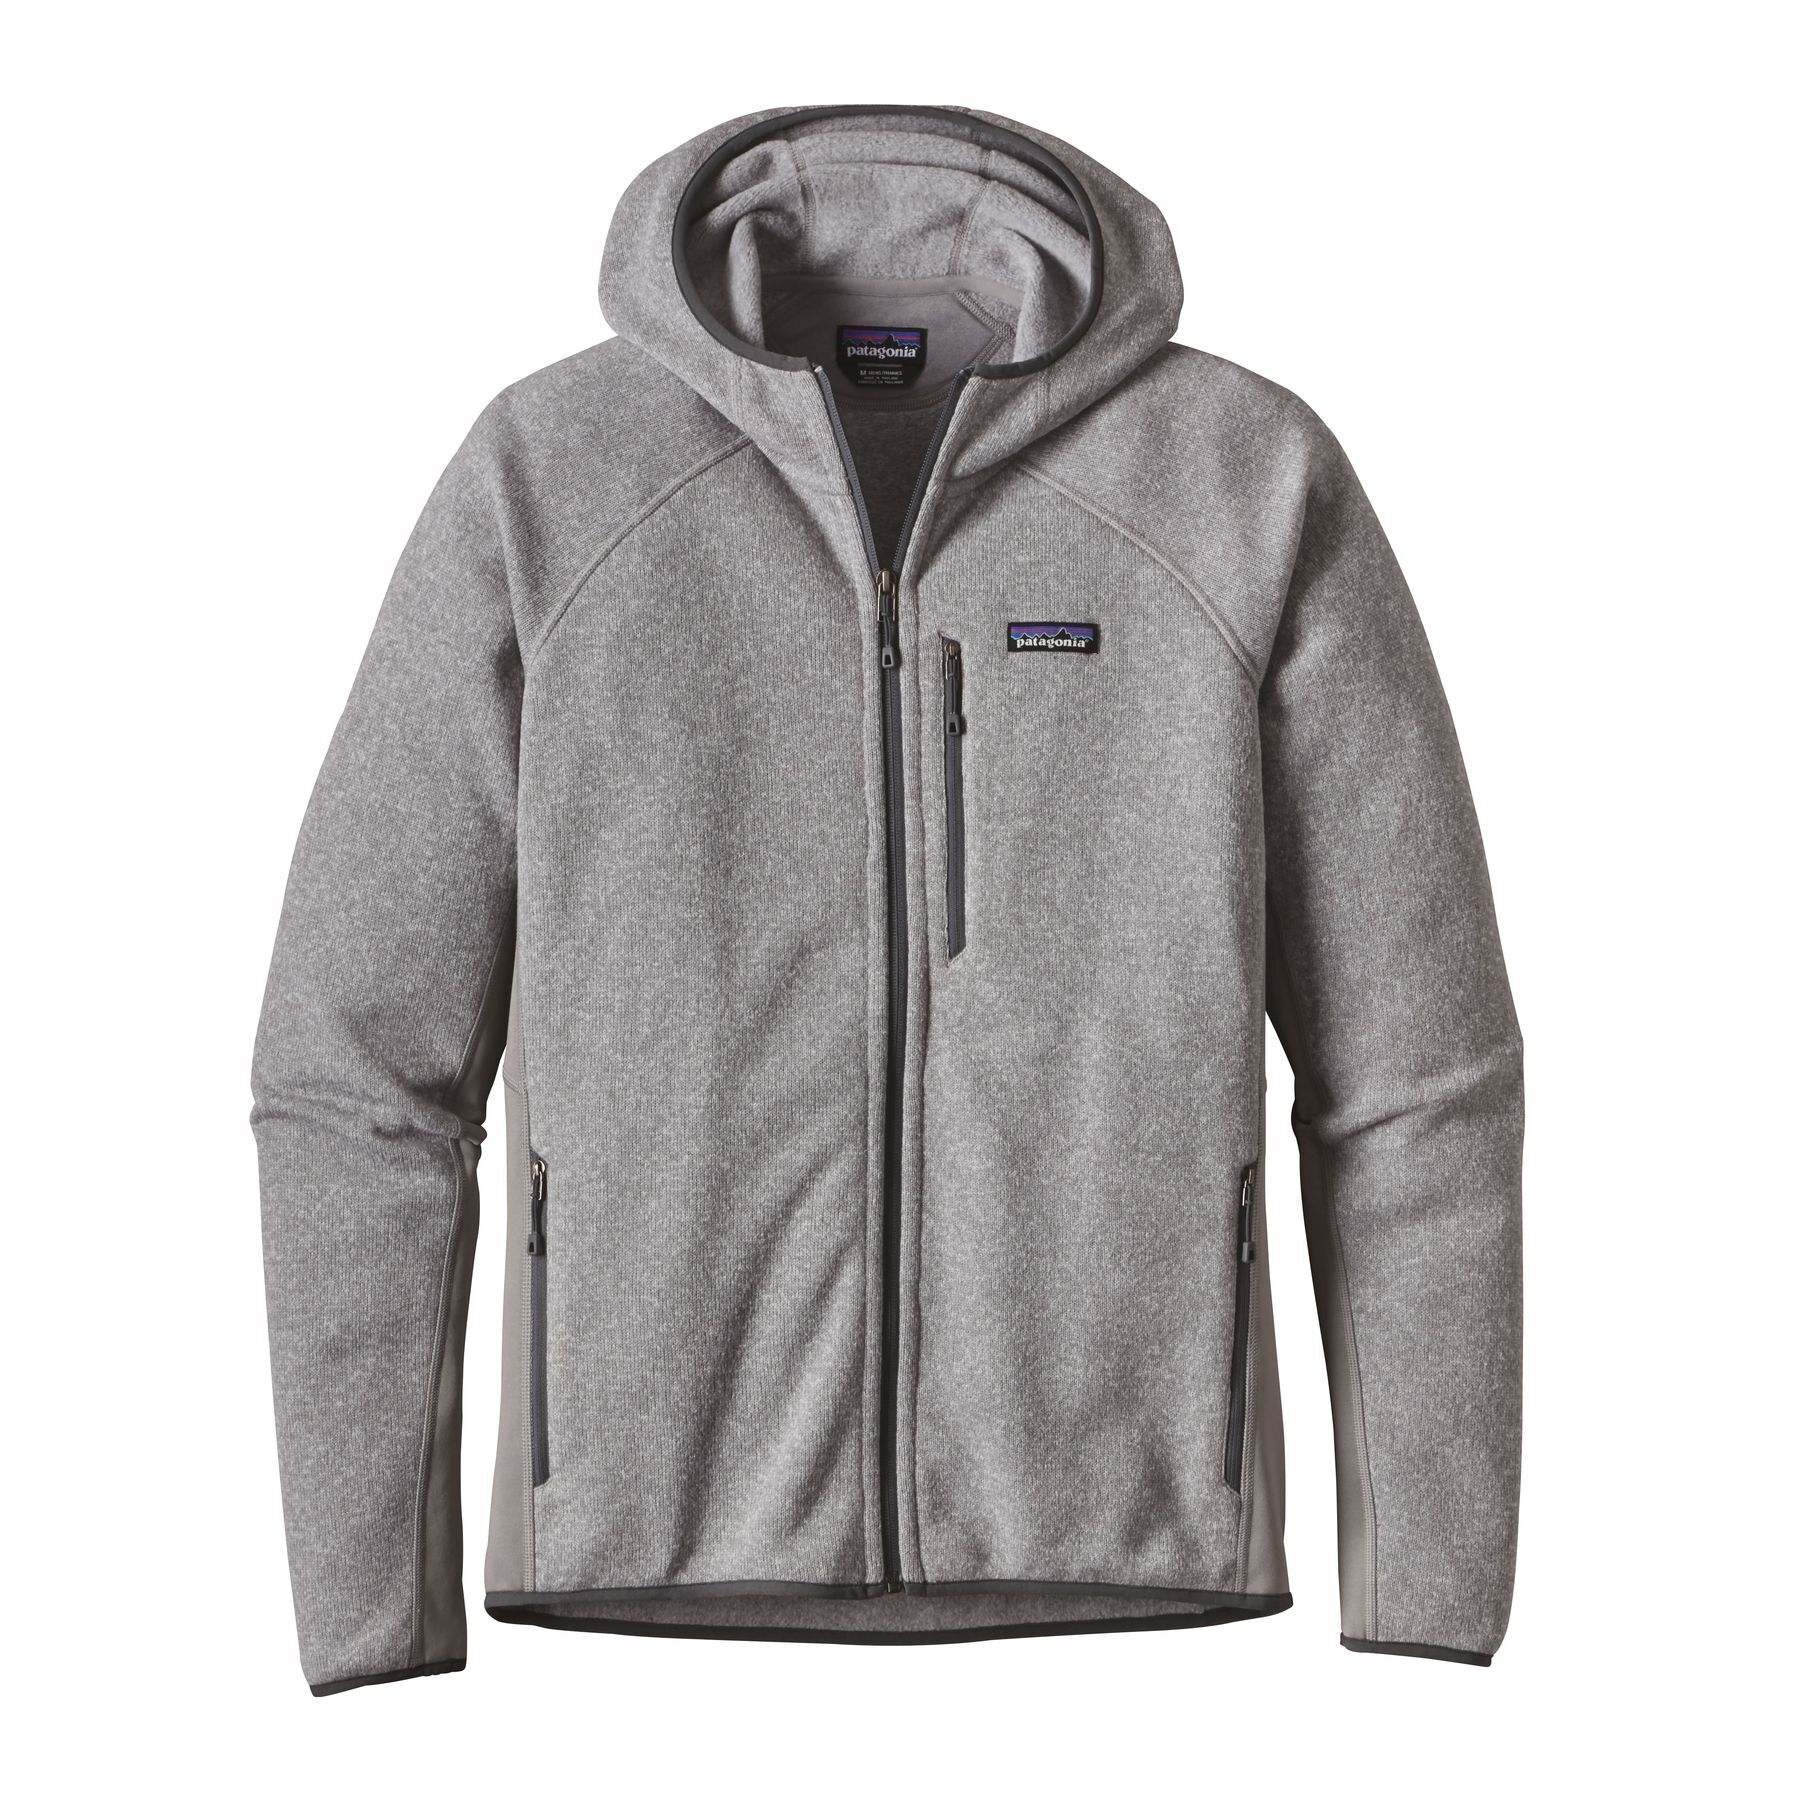 Patagonia - Performance Better Sweater Hoody - Giacca in pile - Uomo